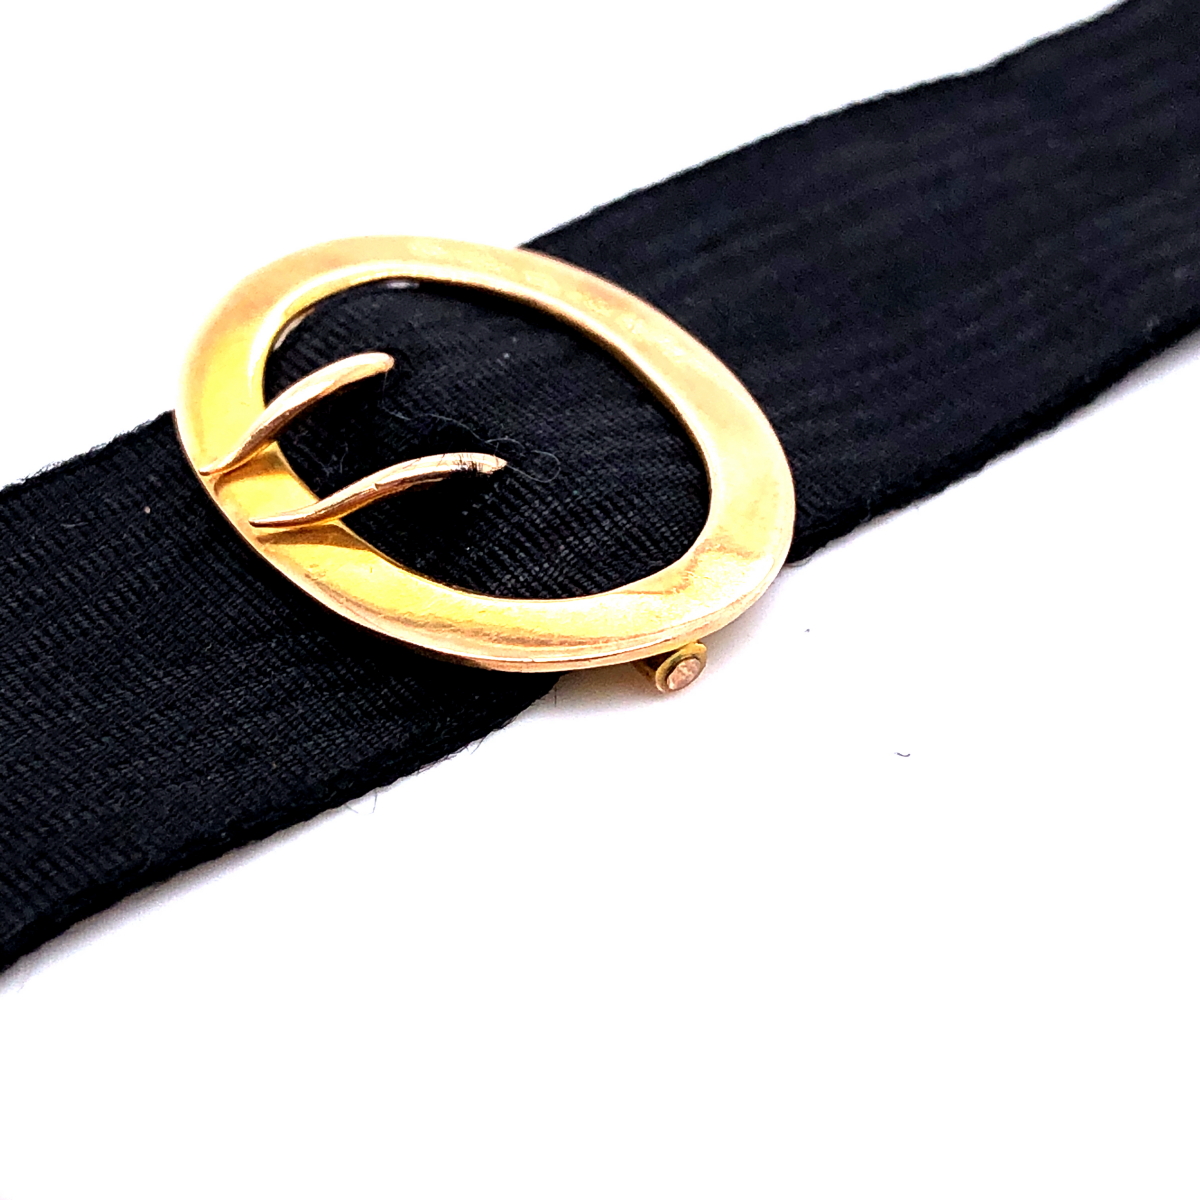 AN 18ct GOLD COCKTAIL WATCH FITTED WITH A 9ct GOLD BRACELET STRAP, A PAIR OF 9ct GOLD CUFFLINKS, - Image 24 of 31